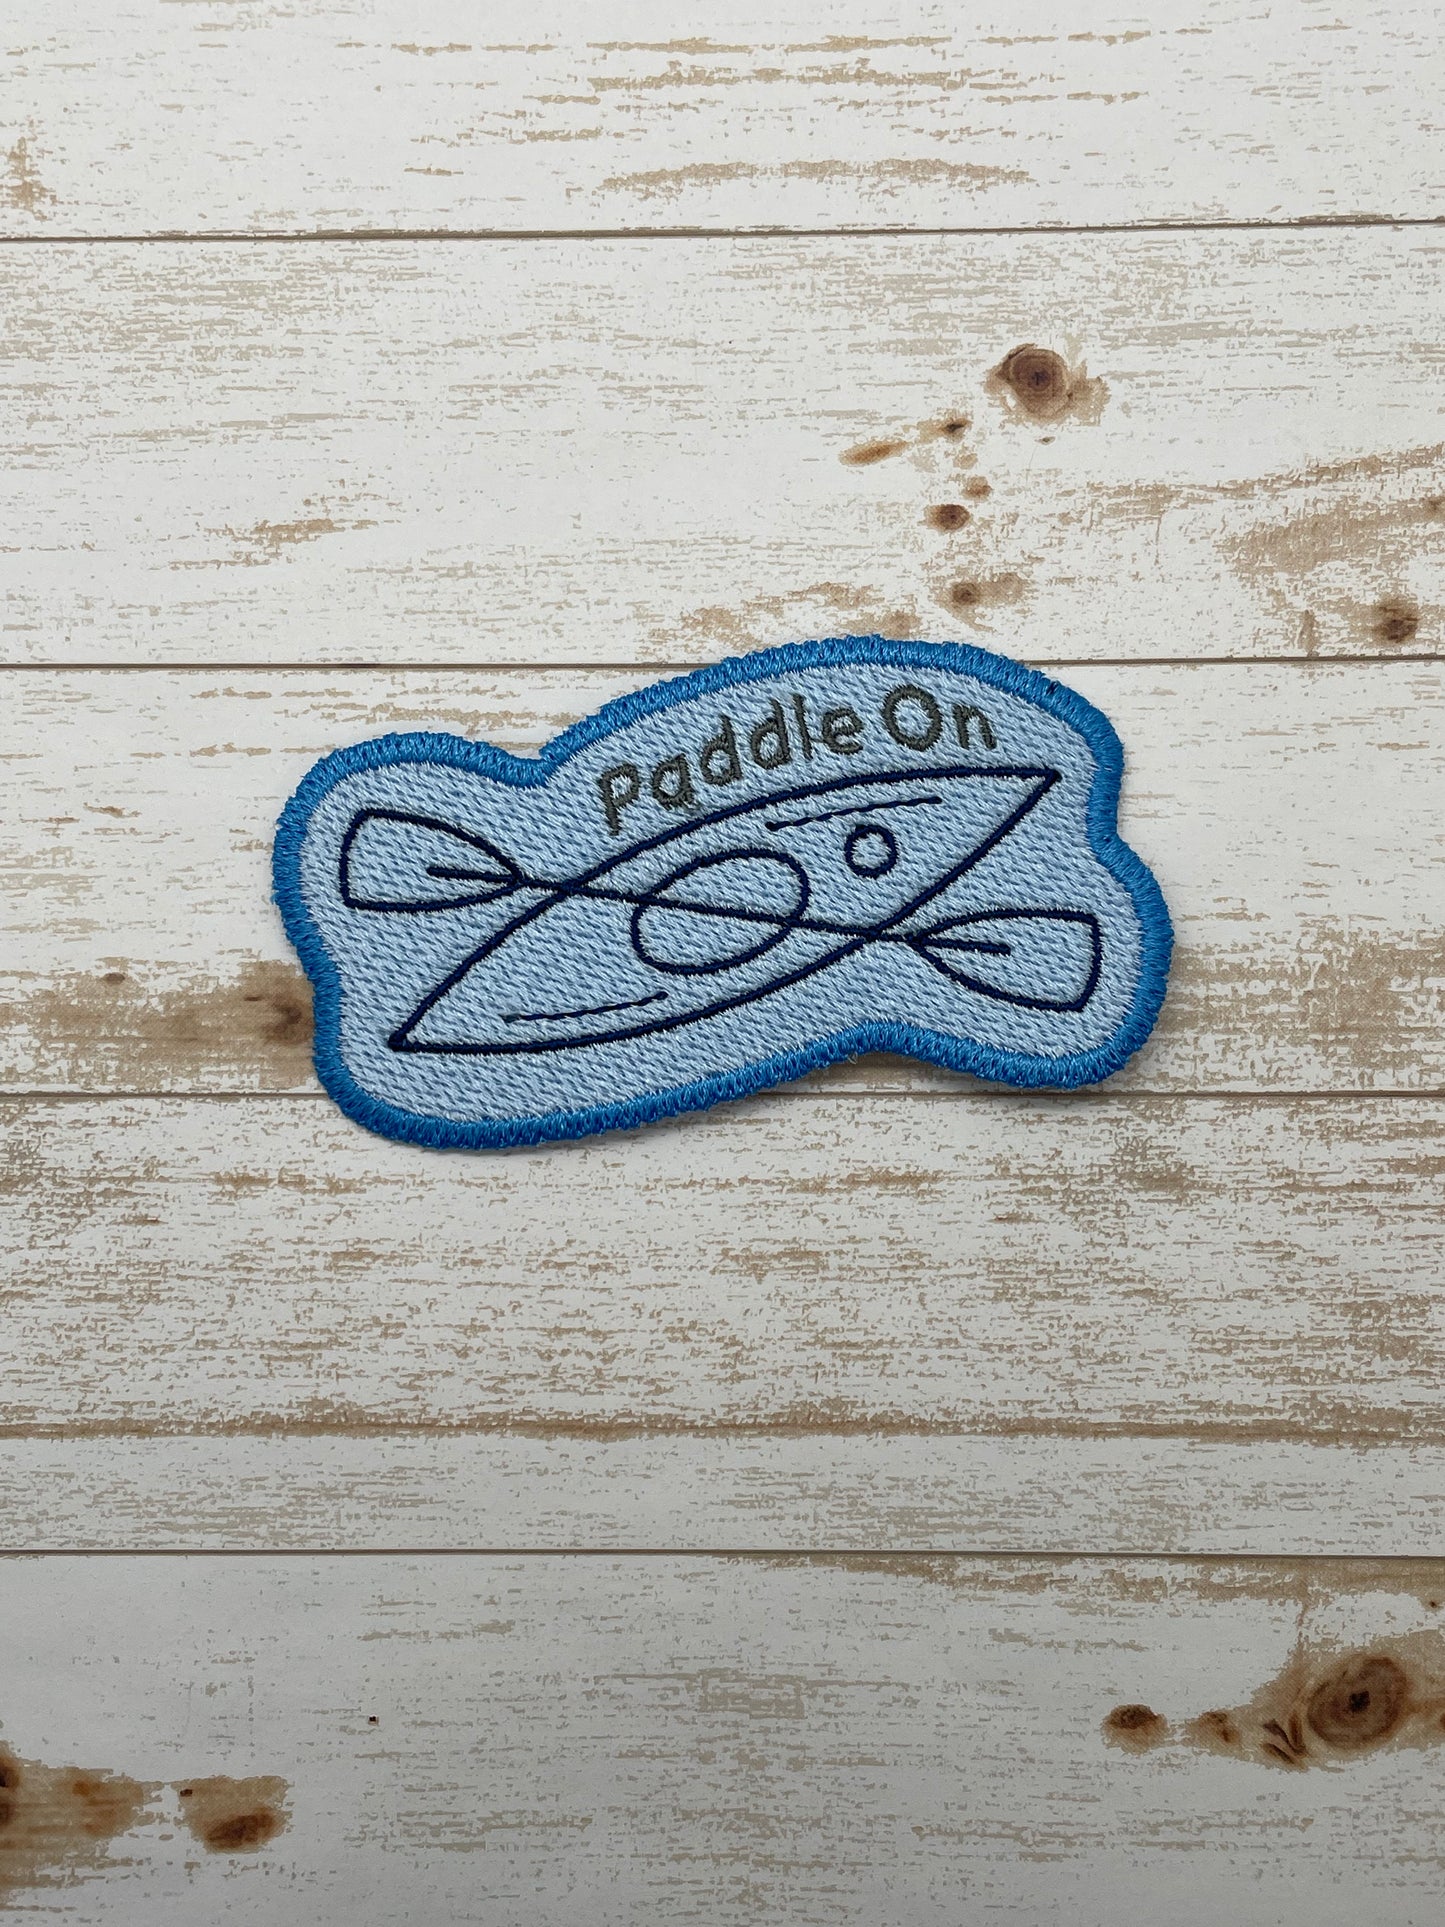 "Paddle On" Patch